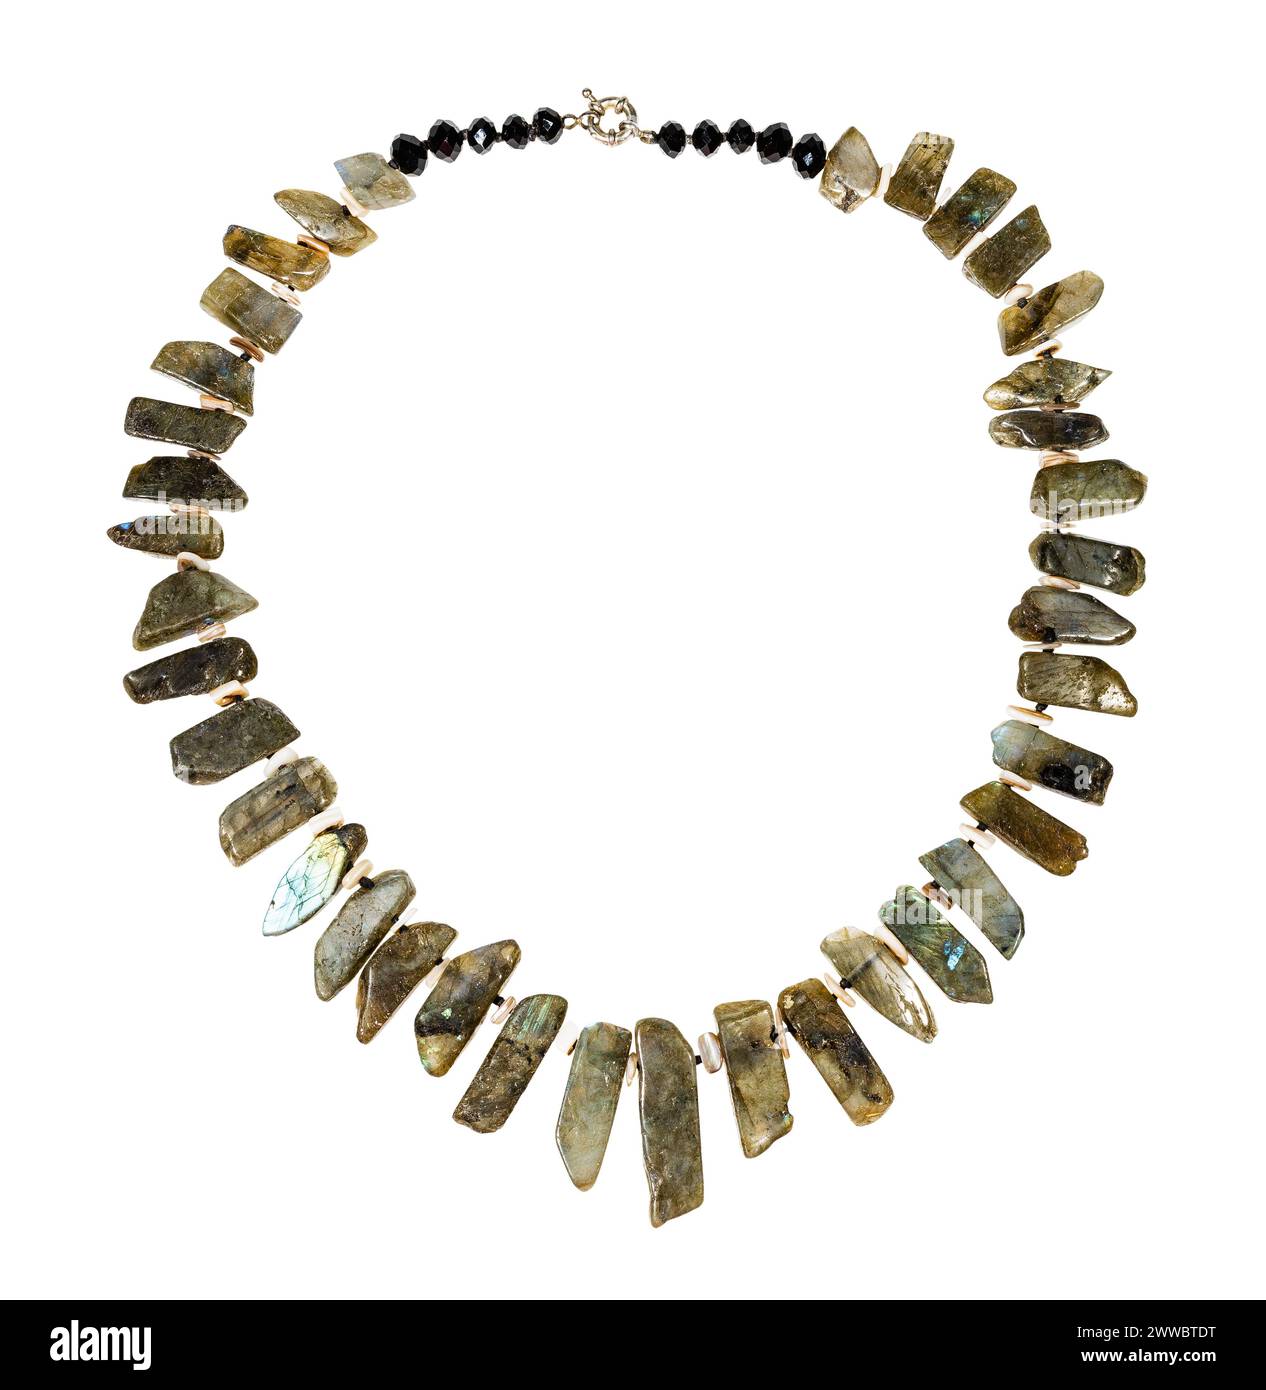 top view of necklace made of polished pieces of natural labradorite stone isolated on white background Stock Photo